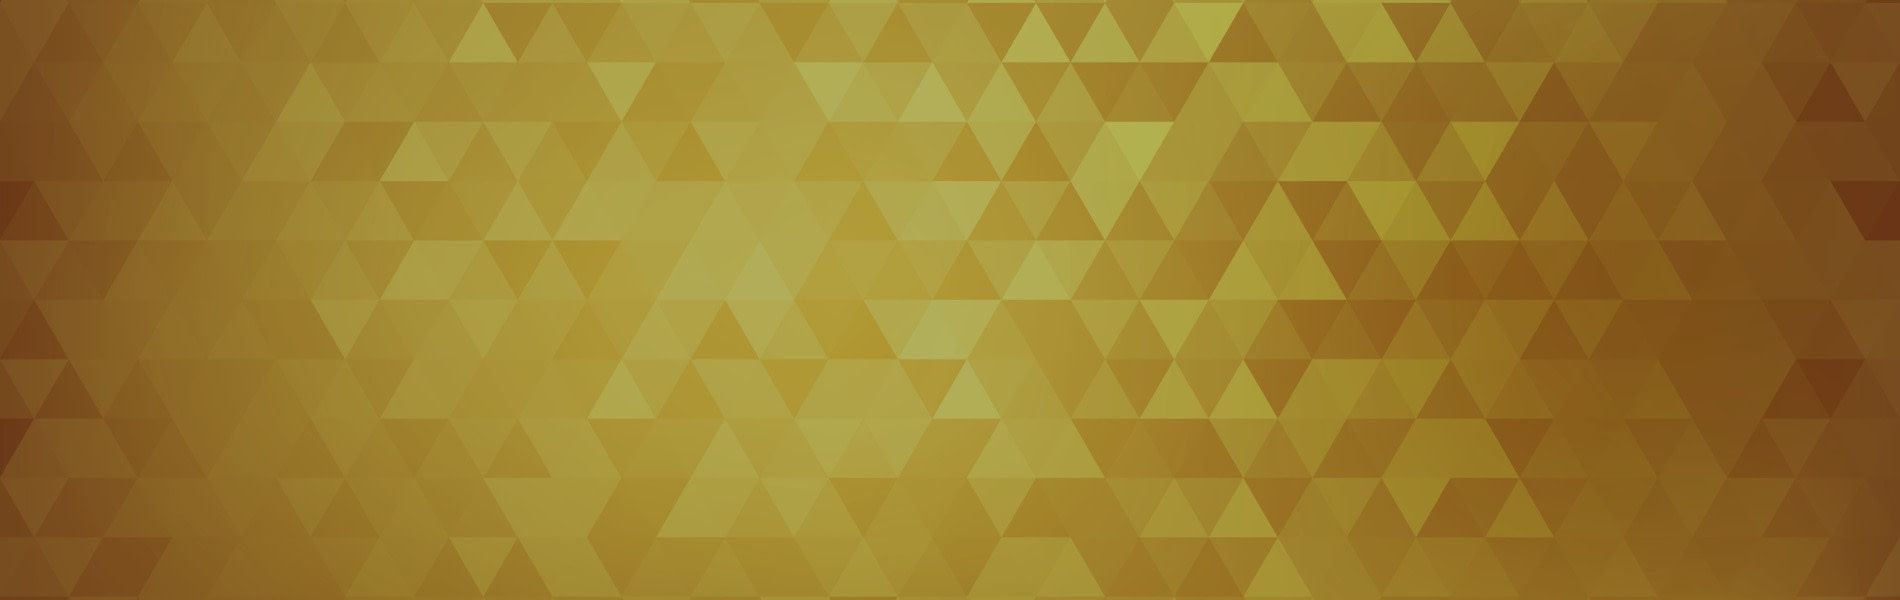 A gold colored graphic of a repeating triangle pattern.